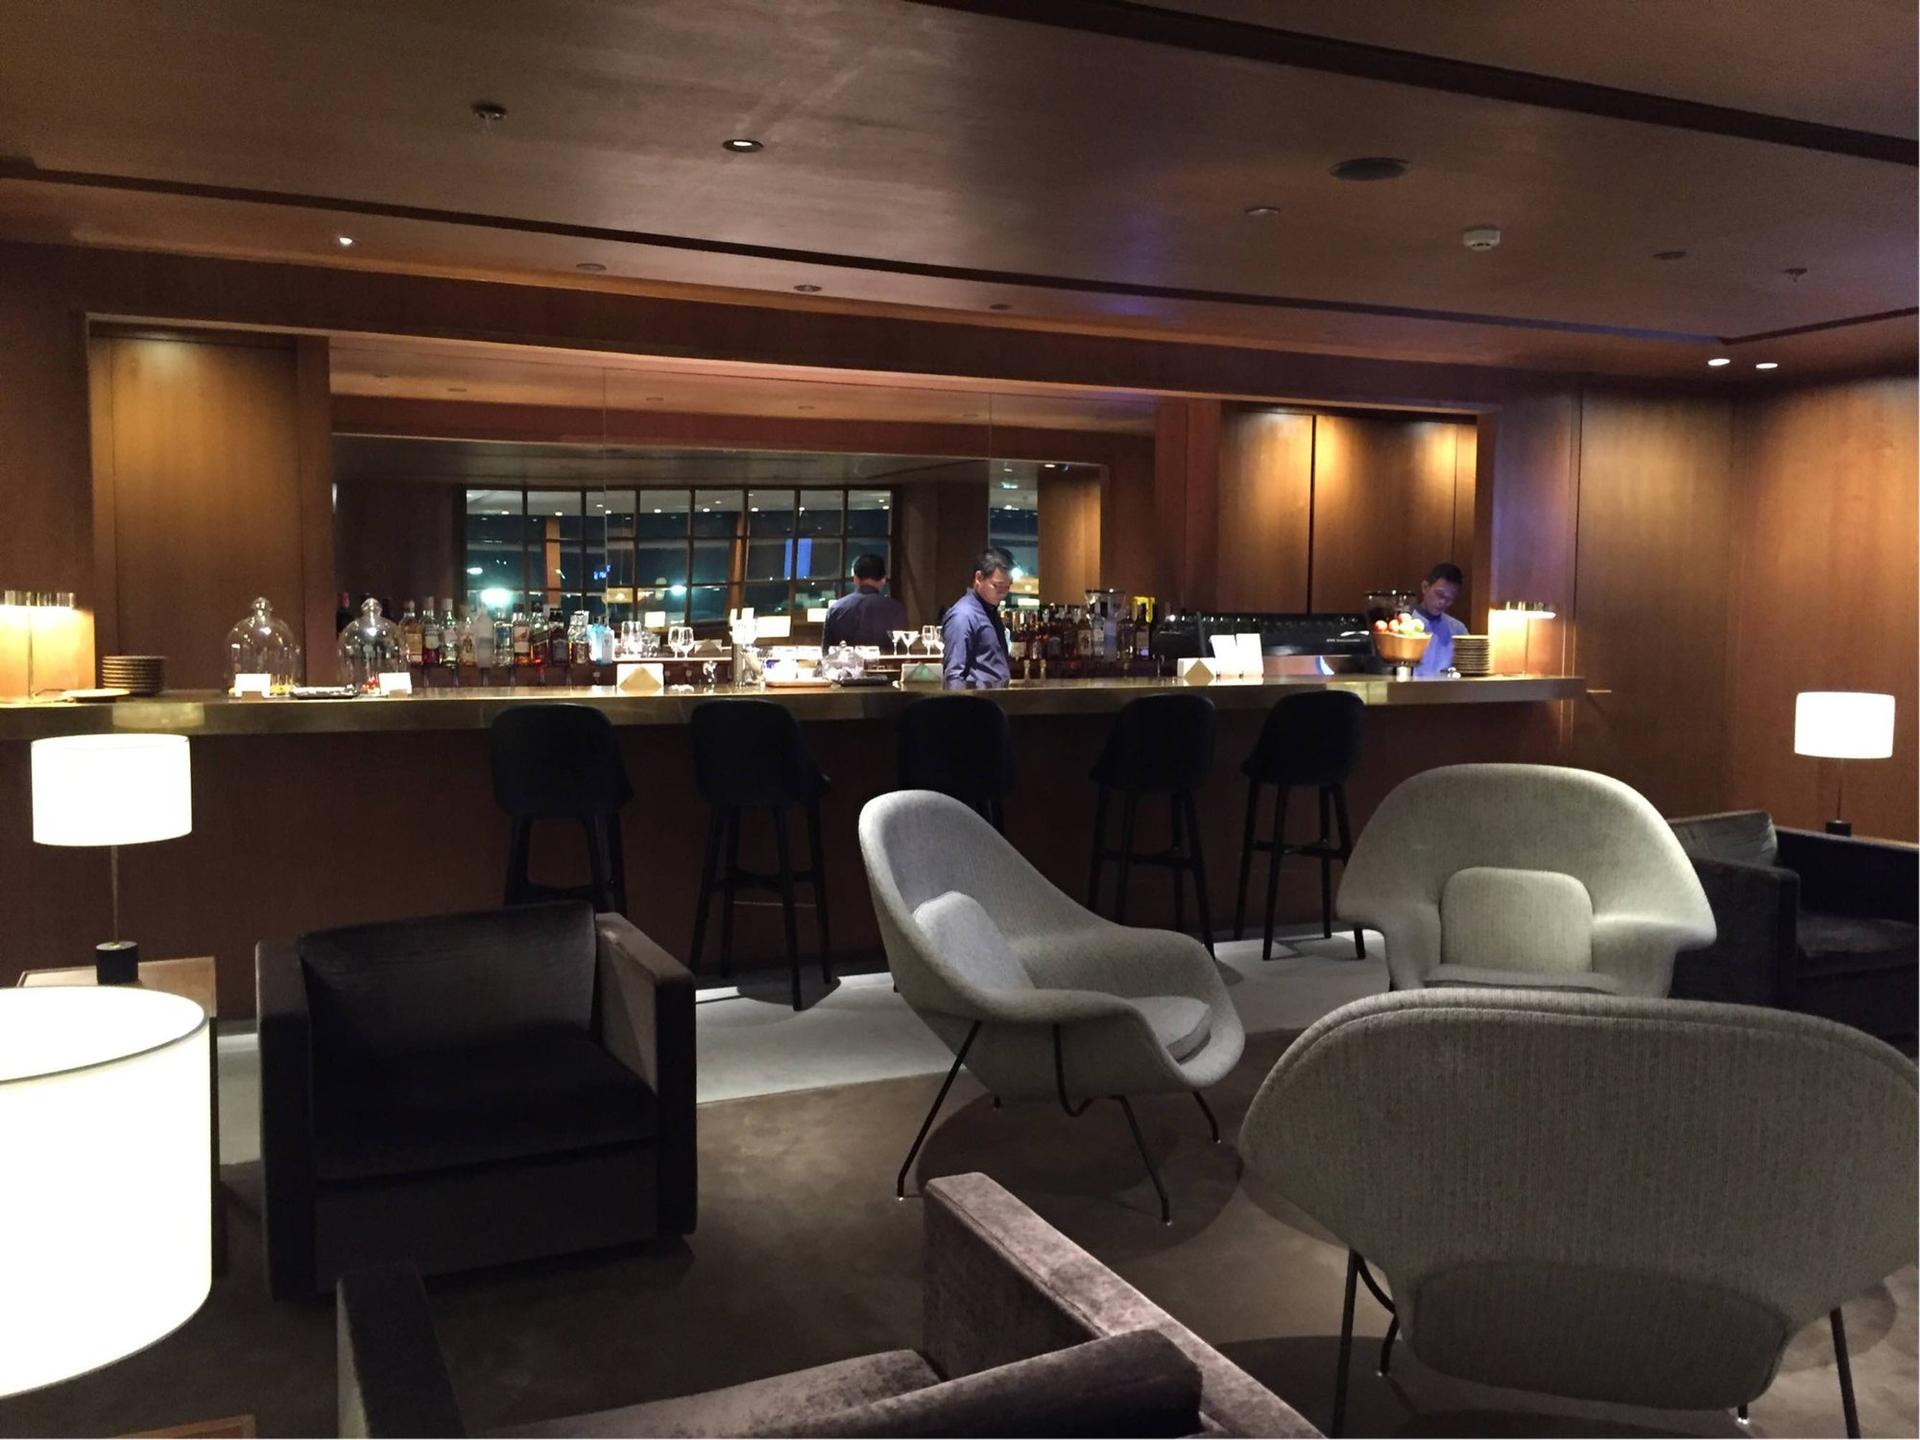 Cathay Pacific First and Business Class Lounge image 8 of 19